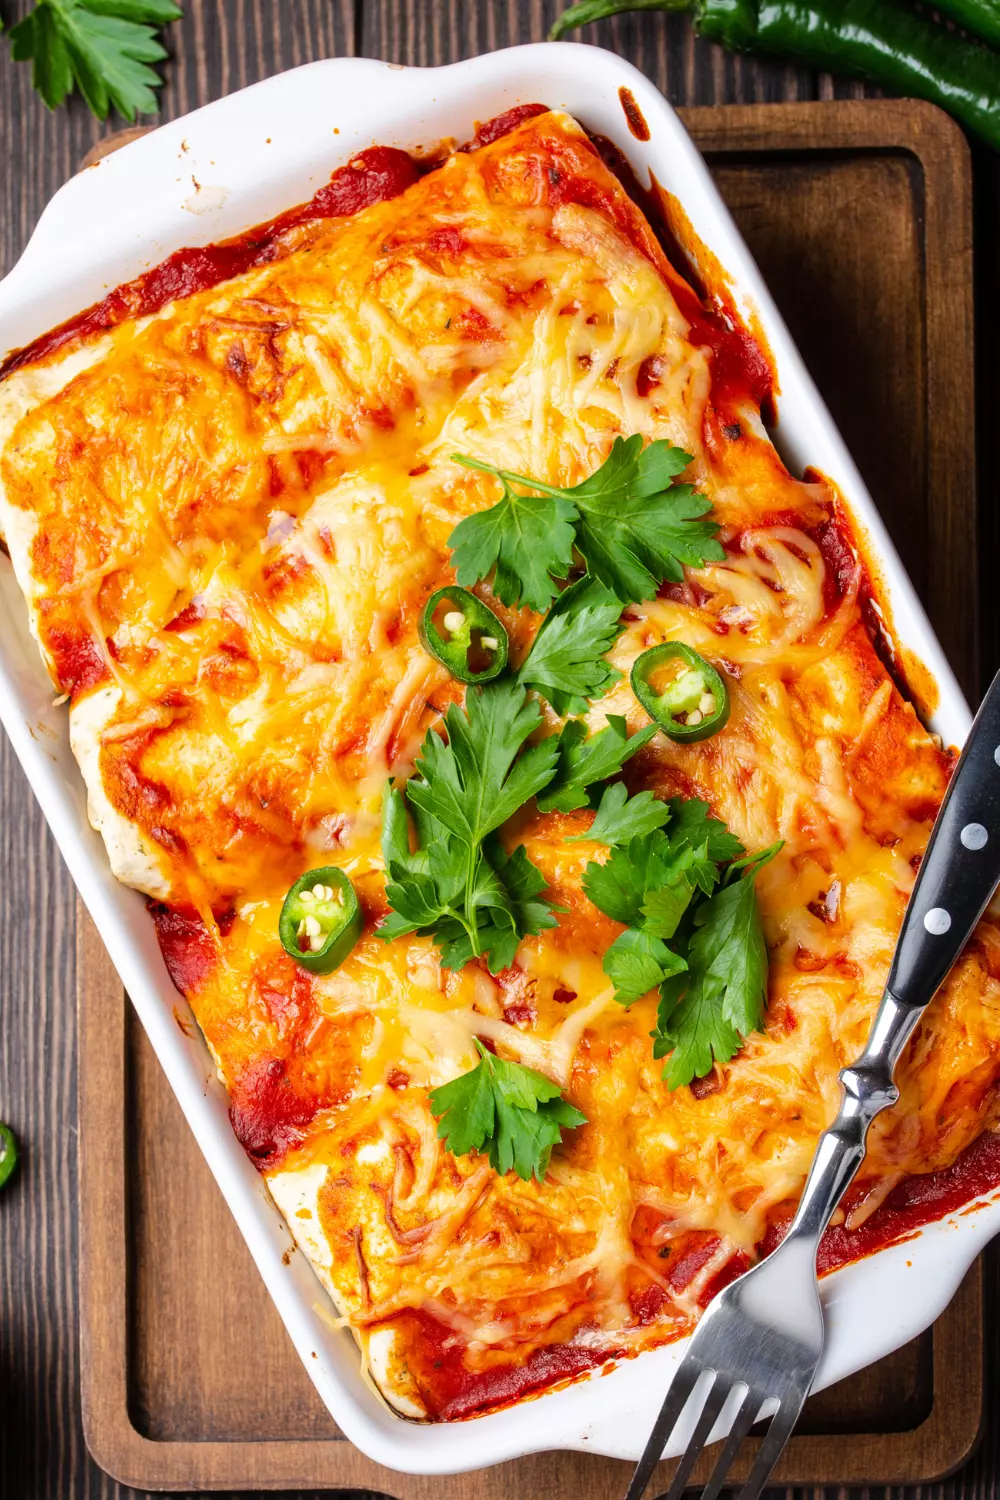 60+ Best Healthy Dinner Recipes to Lose Weight